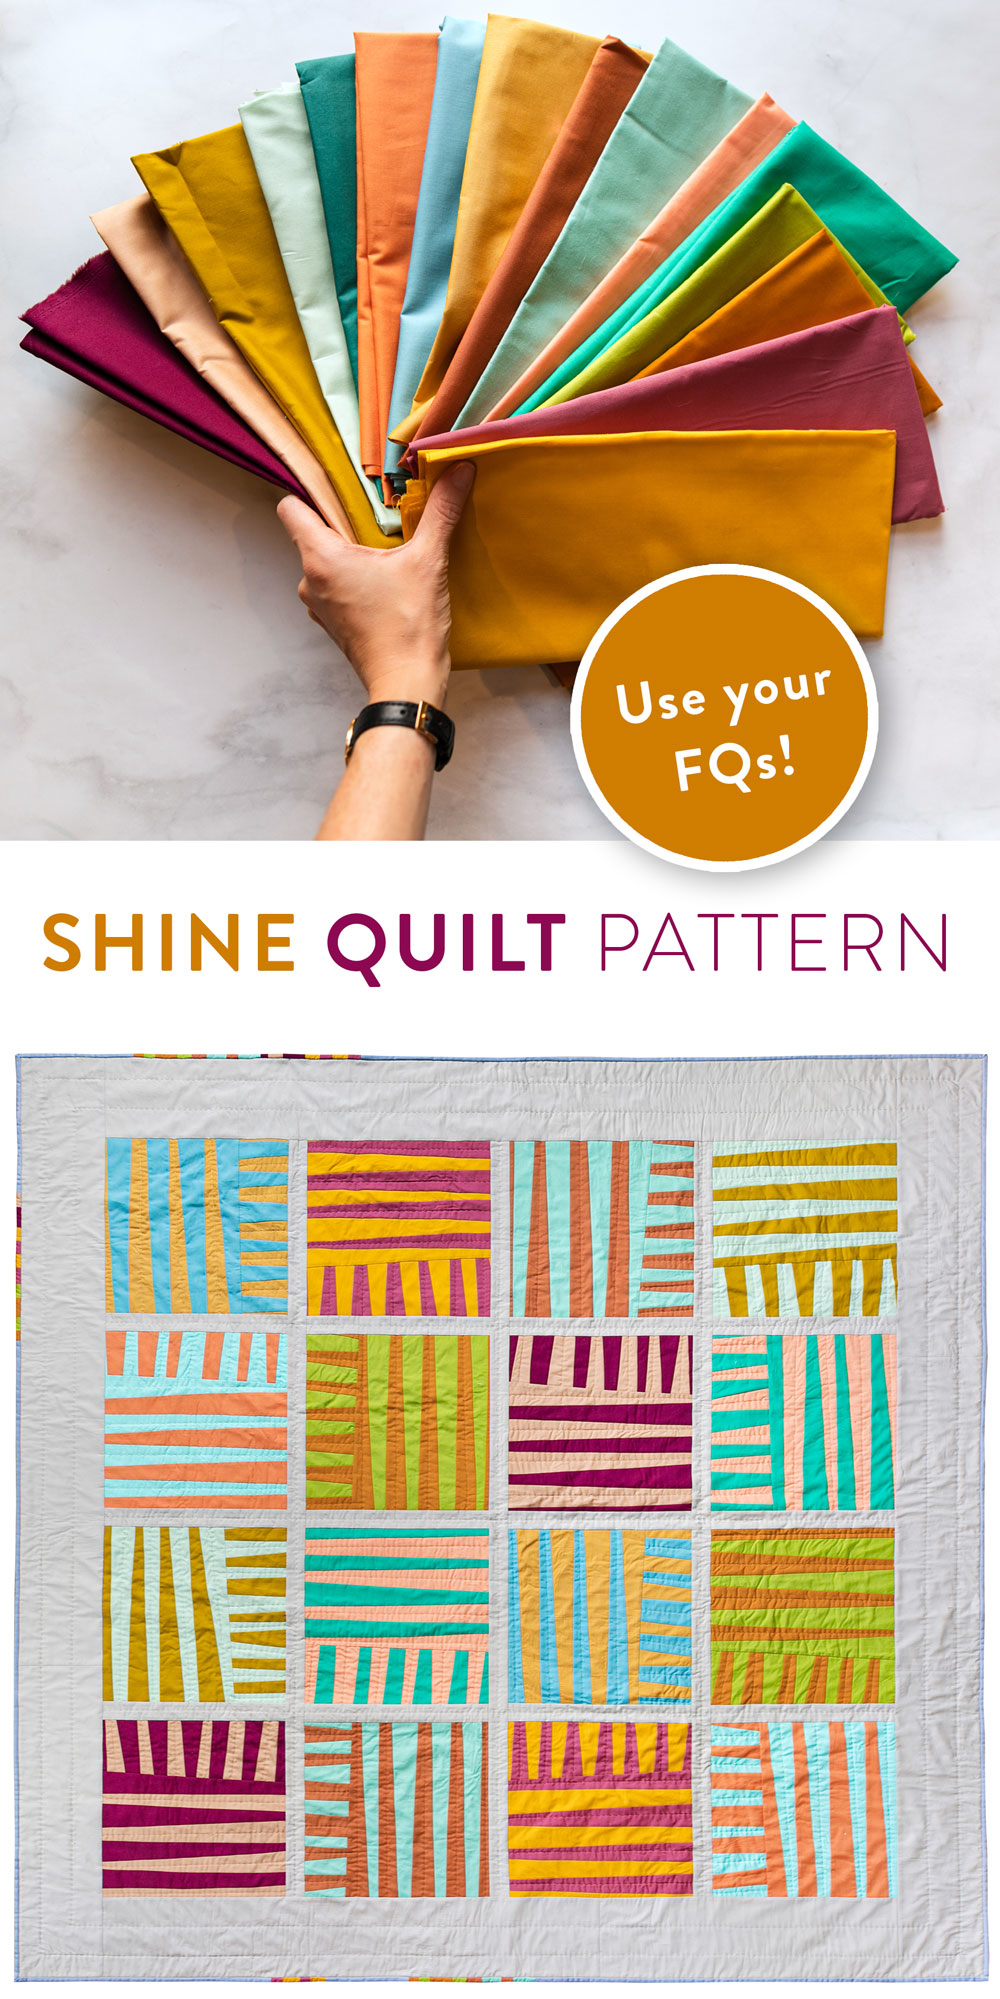 The Shine quilt sew along includes lots of added tips and videos to help you make this modern quilt pattern. This fat quarter quilt pattern is beginner friendly and focuses on improv sewing. suzyquilts.com #quiltedpillow #quilting